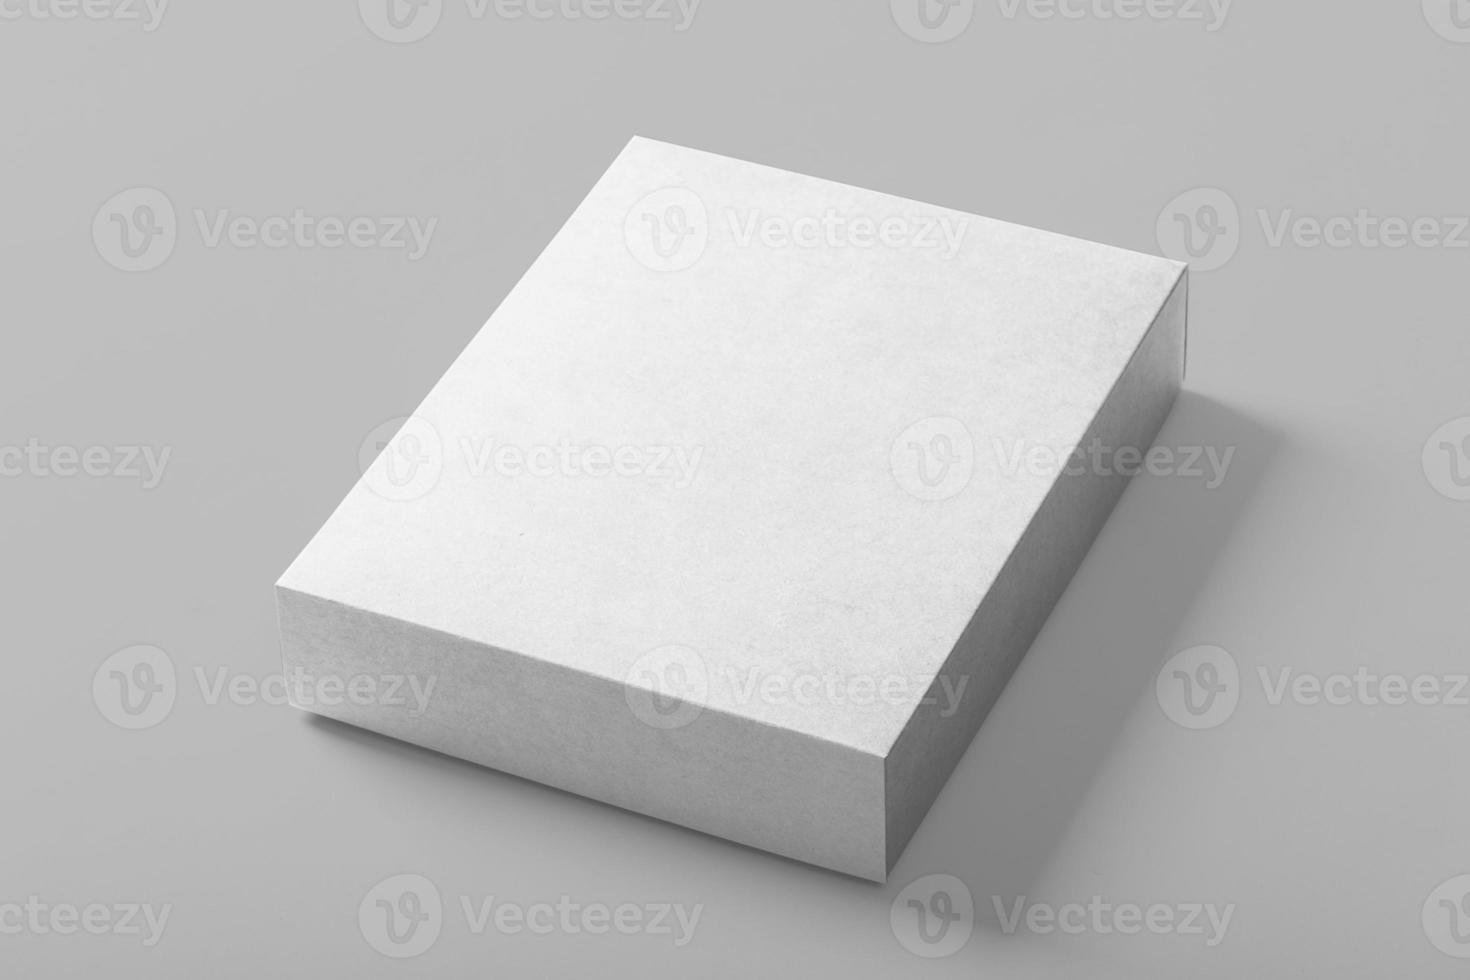 White box packaging mockup template with copy space for your logo or graphic design, isolate on white background photo